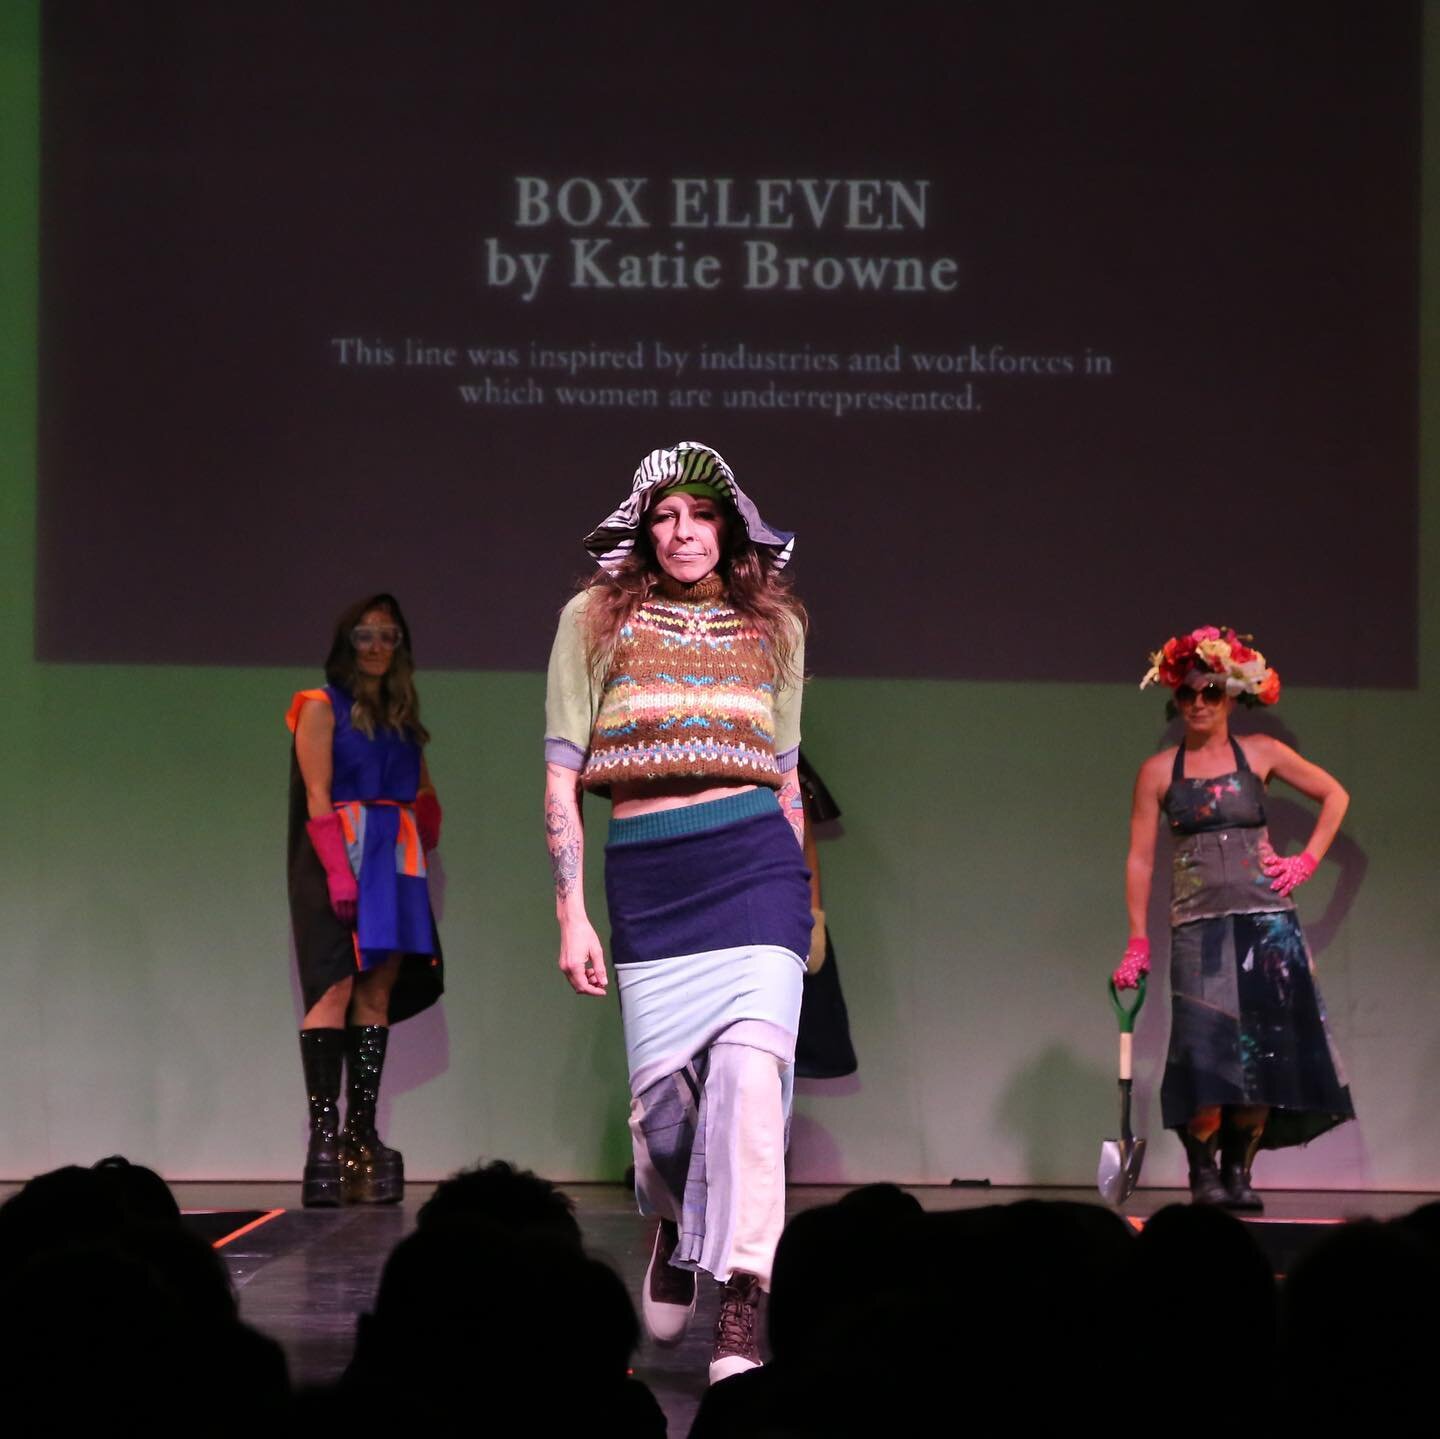 Not only was I able to perform in 4 dance pieces with @comotioncarbondale during the annual Green is the New Black Fashion Extravaganza&hellip; I was also invited to walk in two fashion lines: @boxeleven and @chloecoopercreative. Yes, it was a lot of